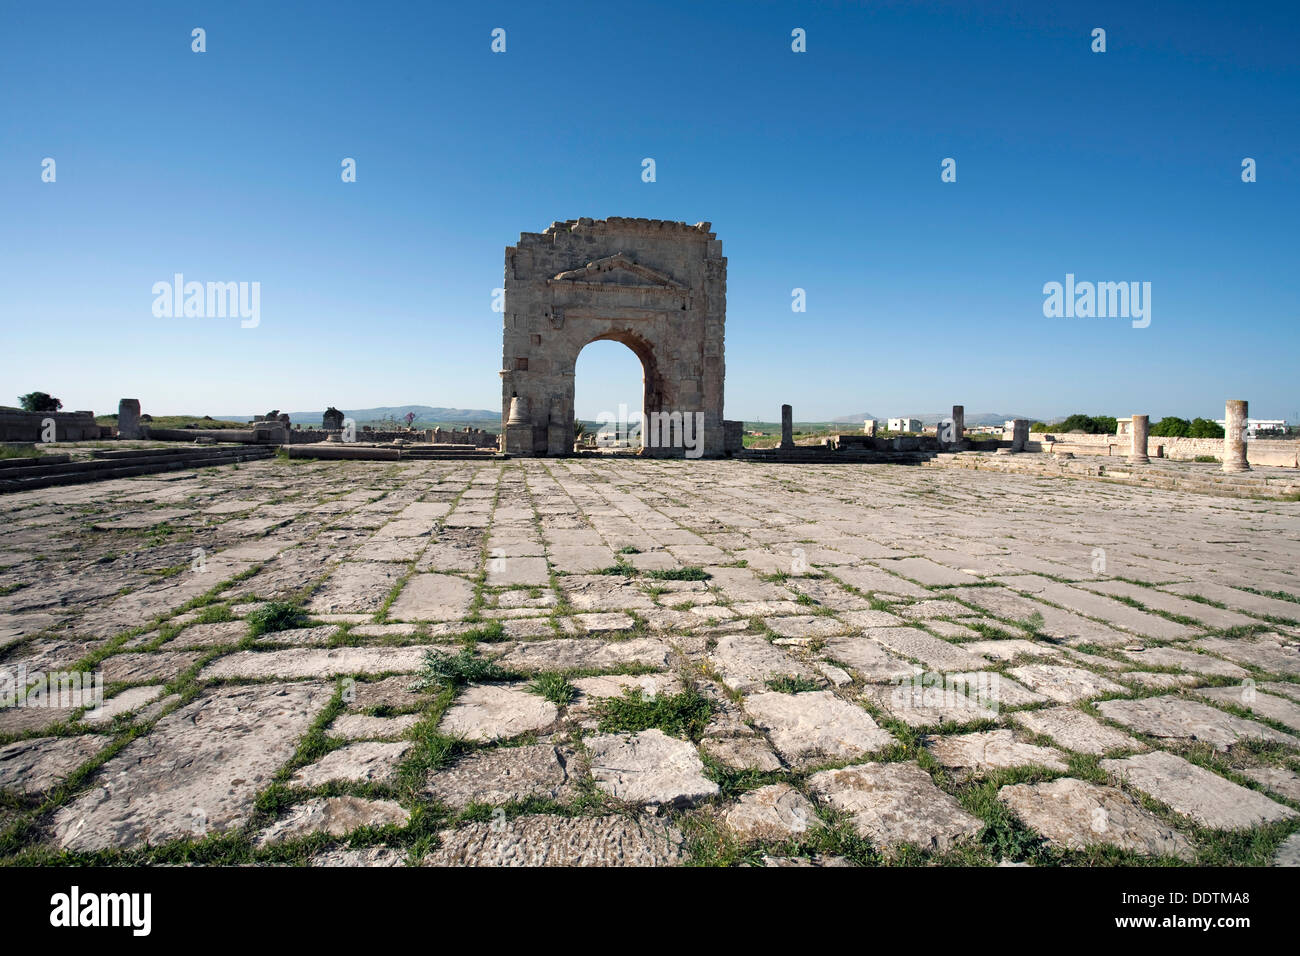 The forum and the Arch of Trajan at Mactaris, Tunisia. Artist: Samuel Magal Stock Photo